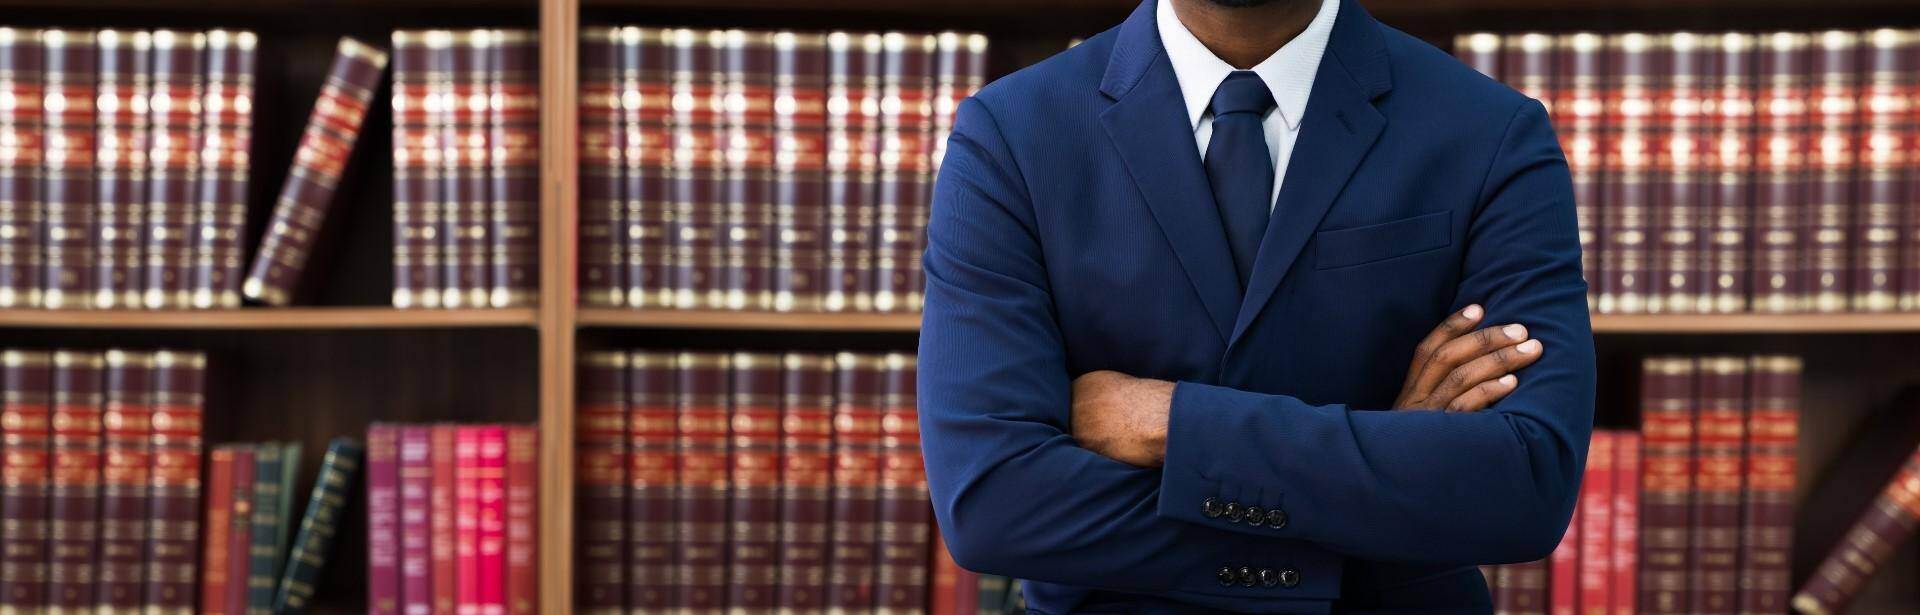 A black lawyer standing in front of a bookshelf of law book in Sandy Springs, Georgia